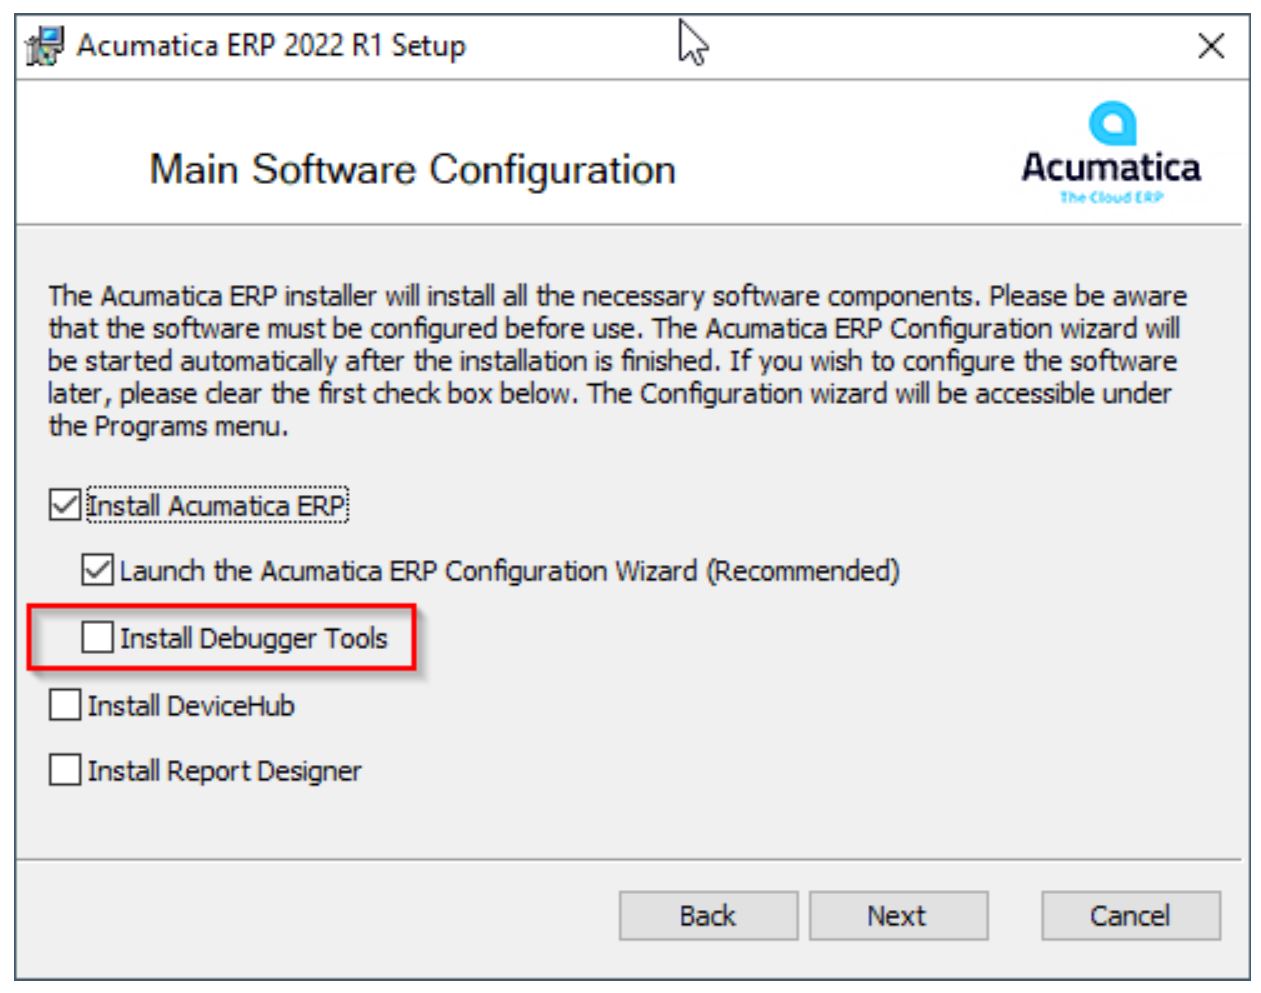 Setting Up Local Instances of Acumatica